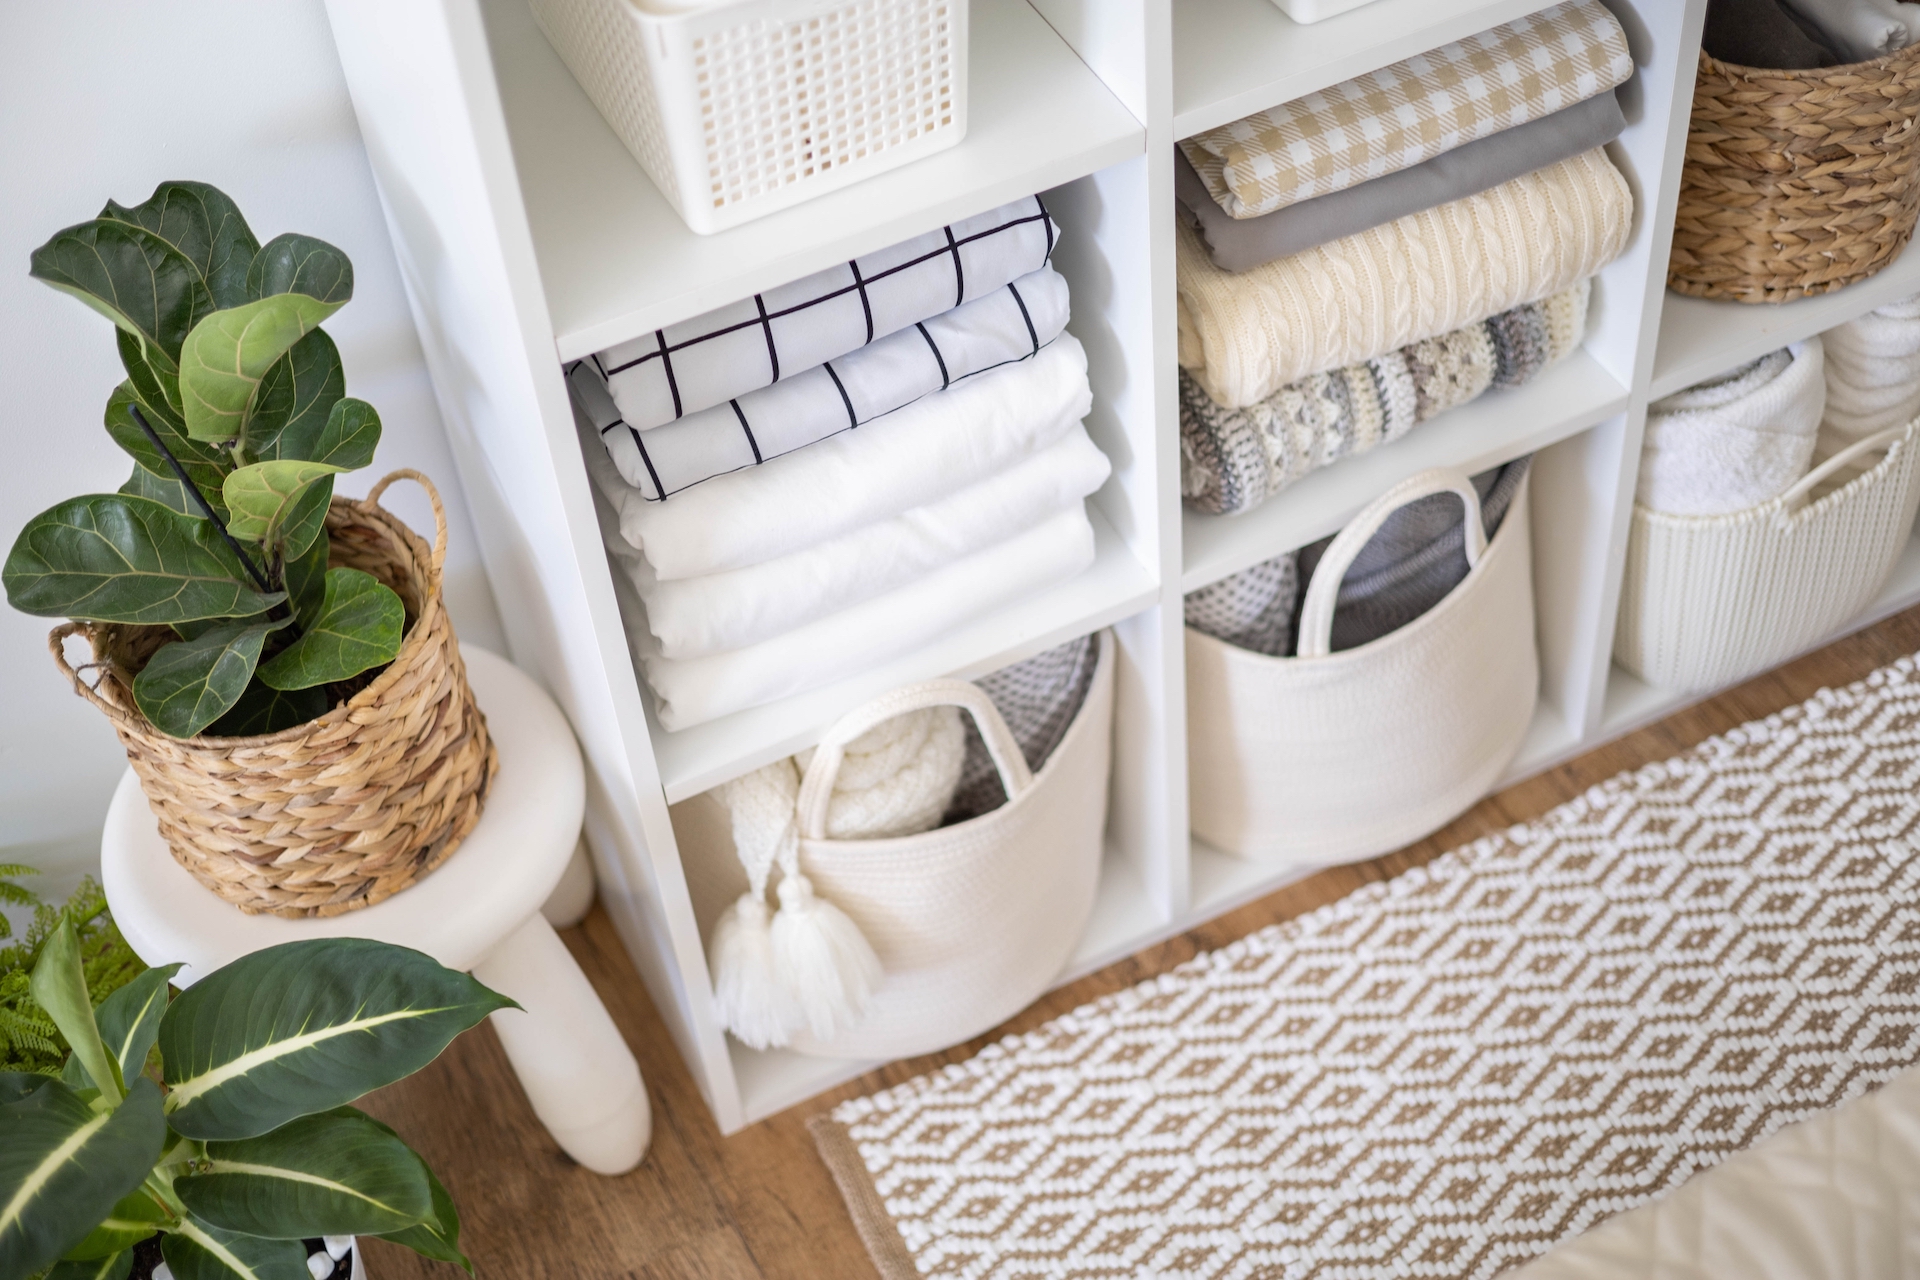 Declutter your home for spring and use bins and baskets to store items ©Kostikova Natalia